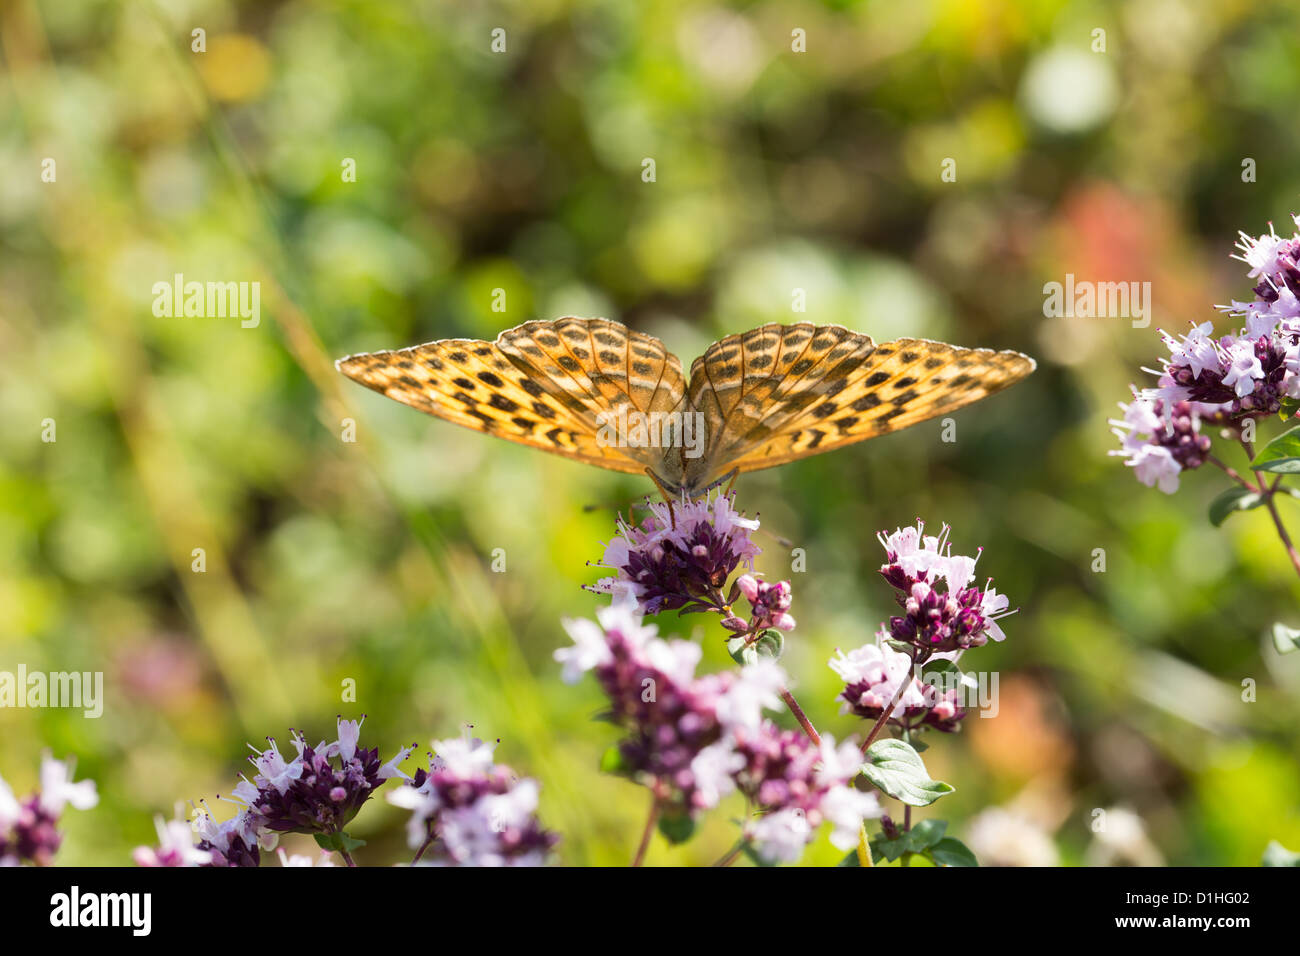 butterfly on a flower in nature, flora and fauna Stock Photo